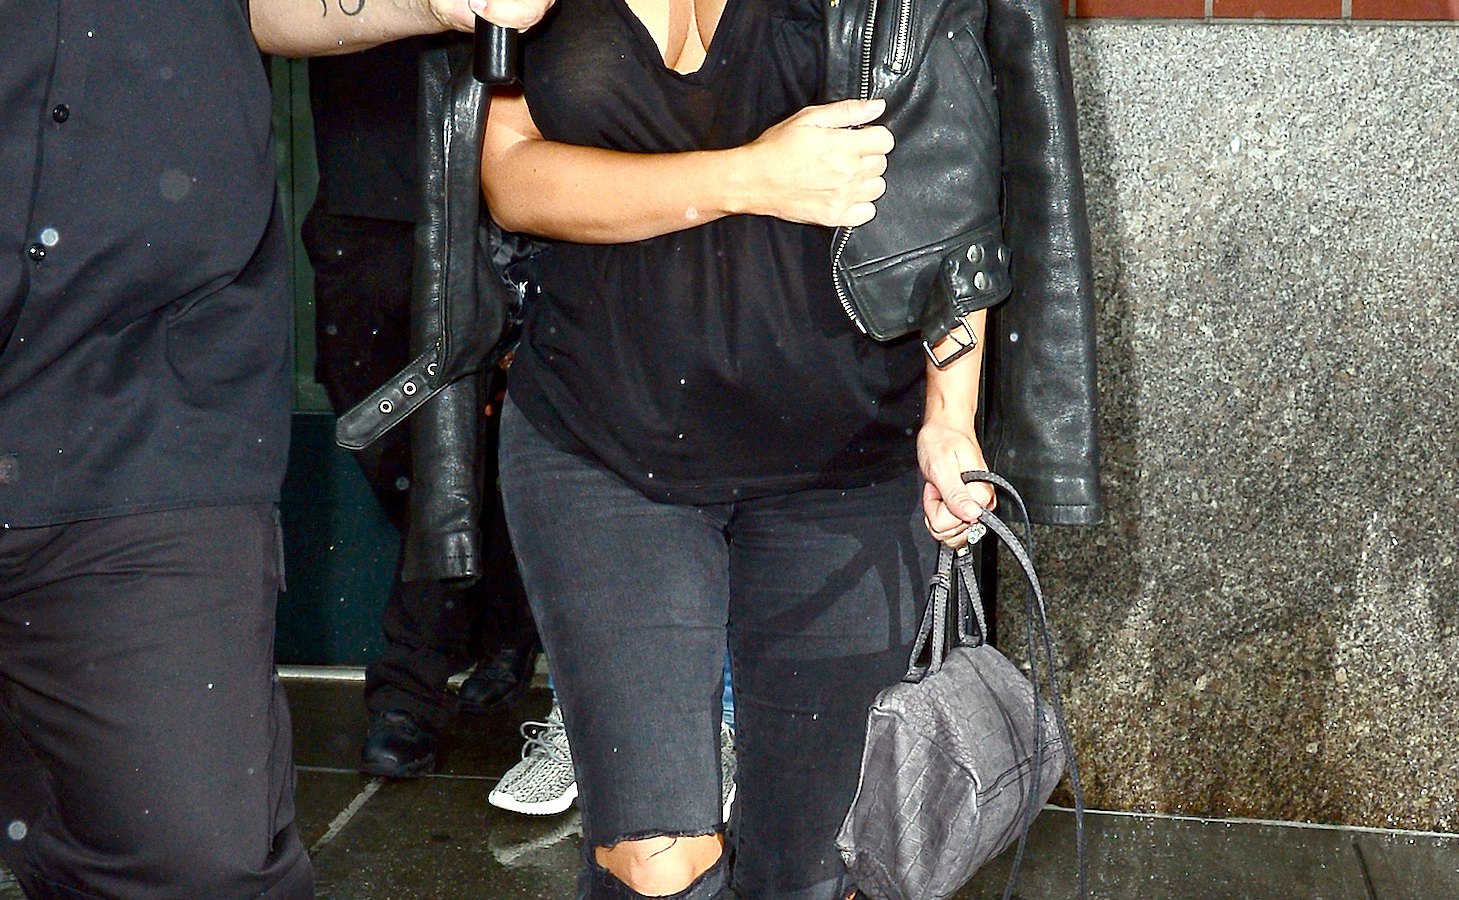 Pregnant Kim Kardashian leaves her apartment in NYC on June 1, 2015.